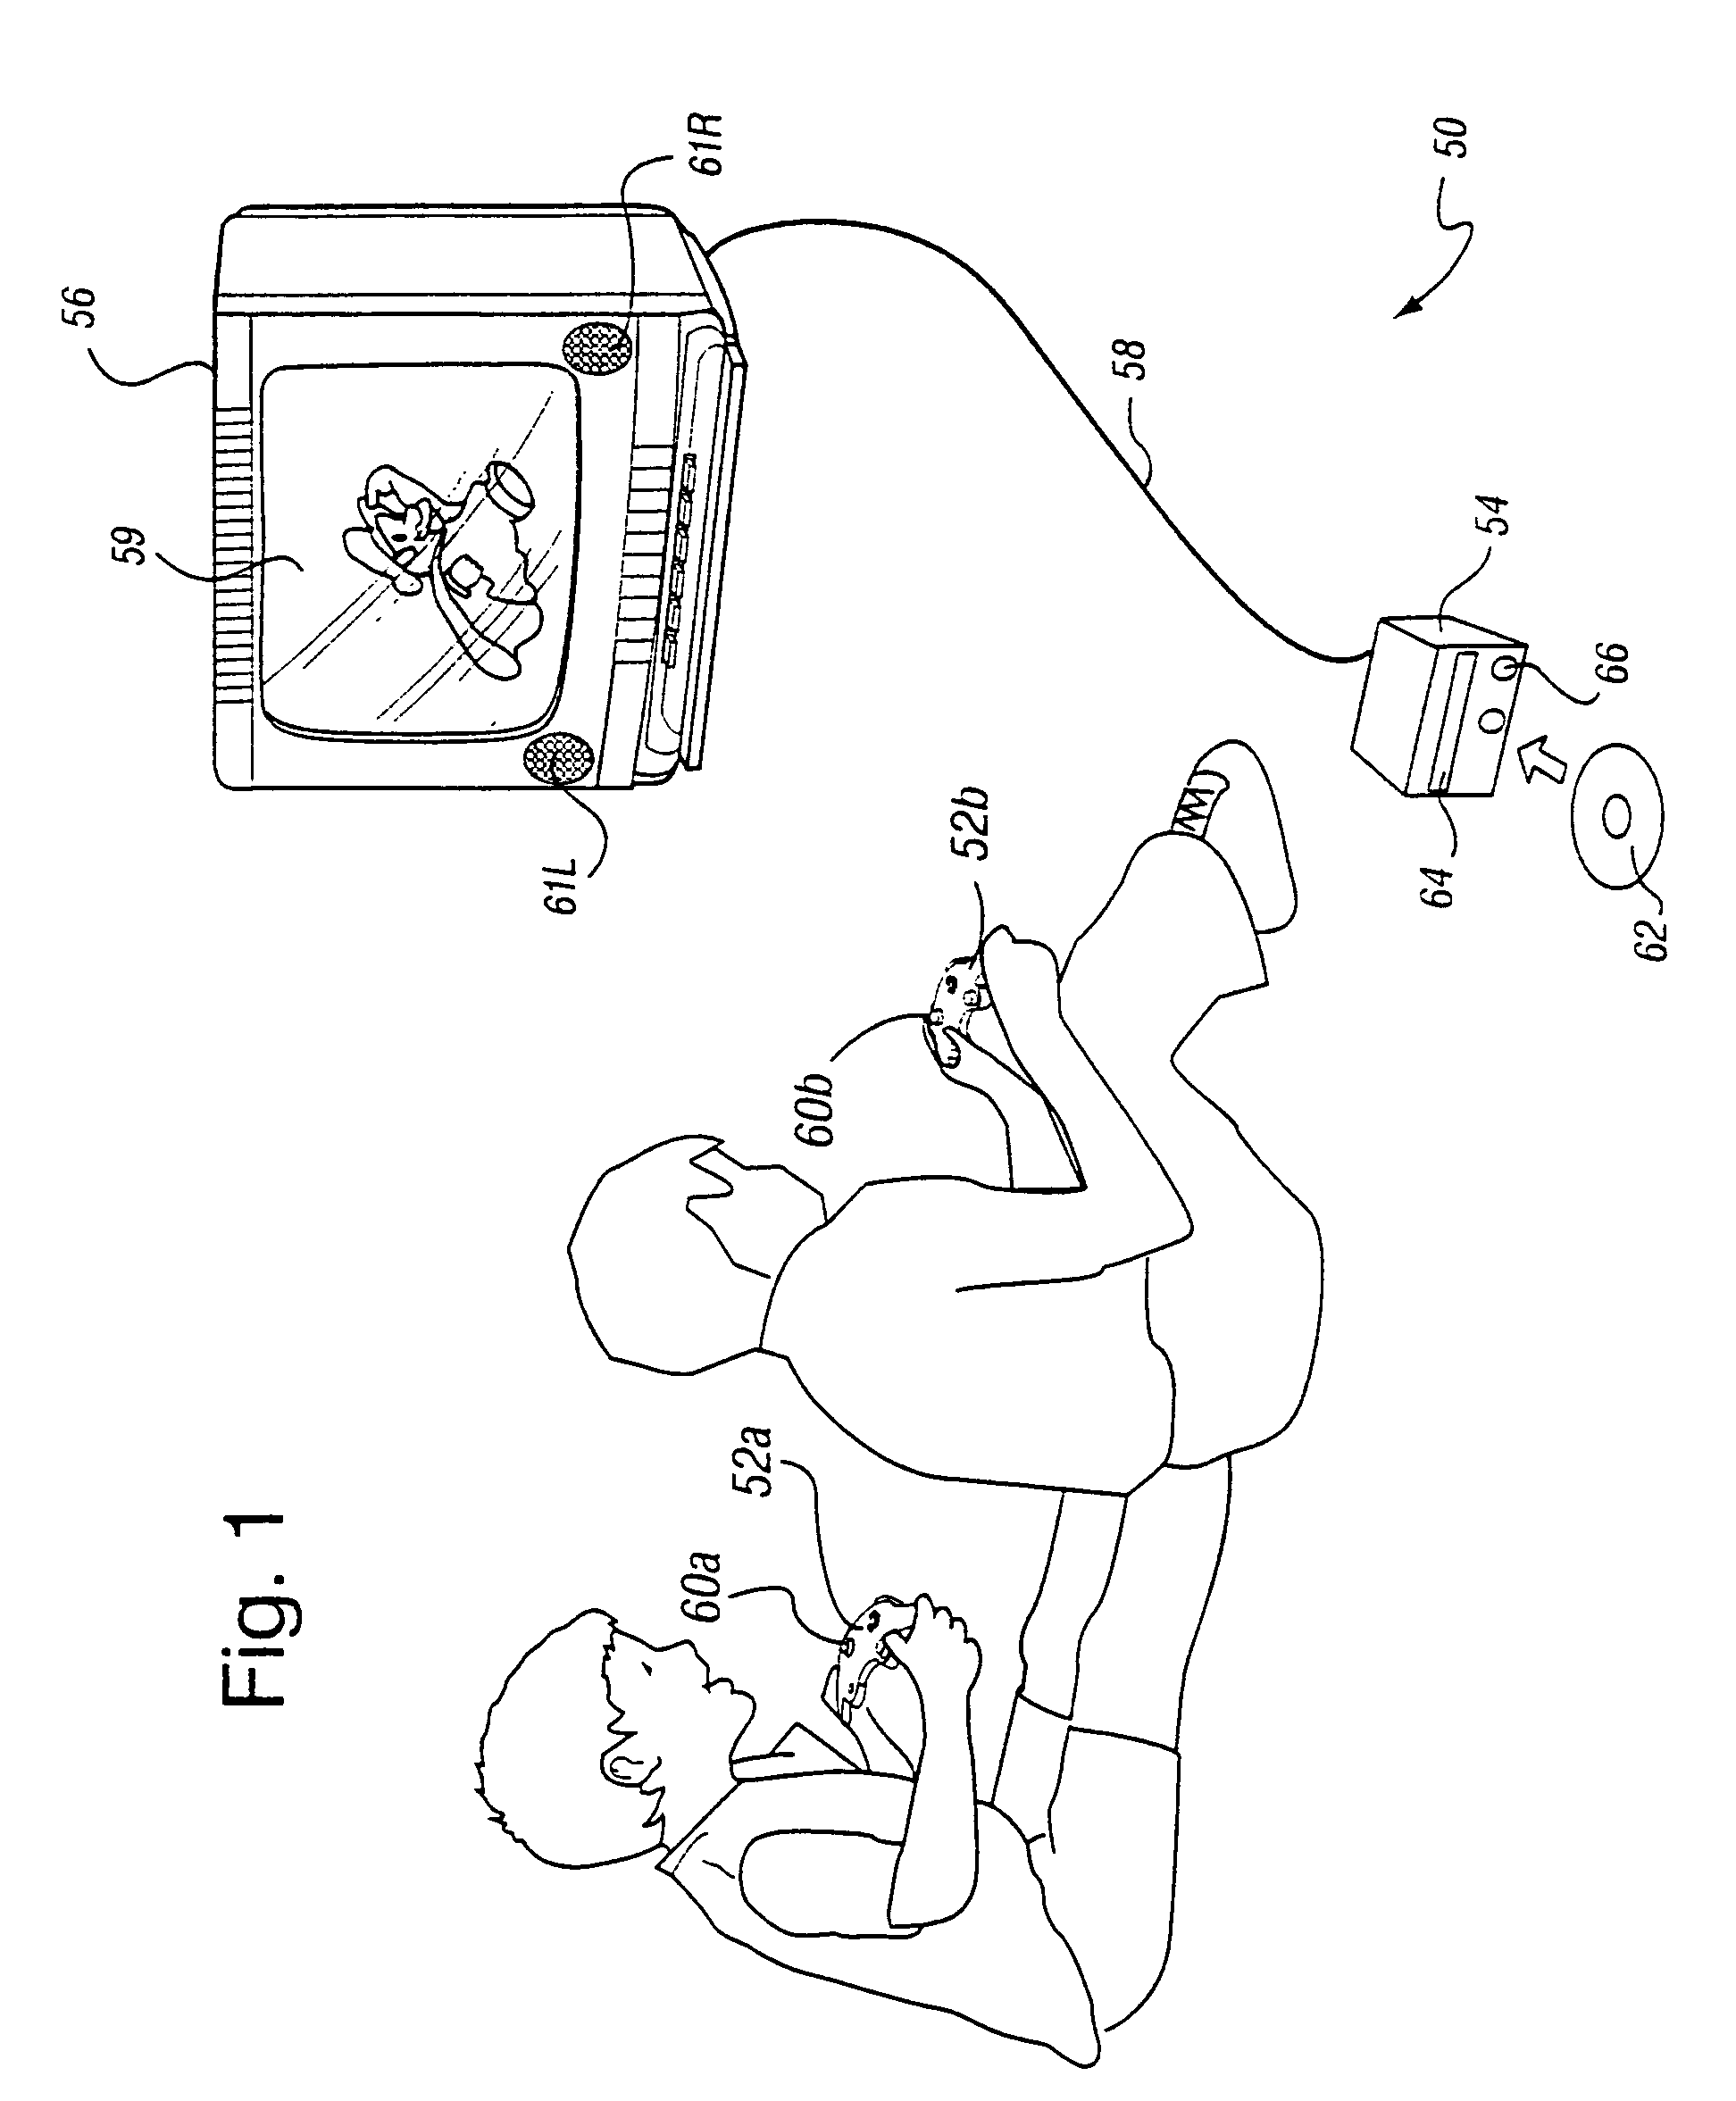 Method and apparatus for interleaved processing of direct and indirect texture coordinates in a graphics system